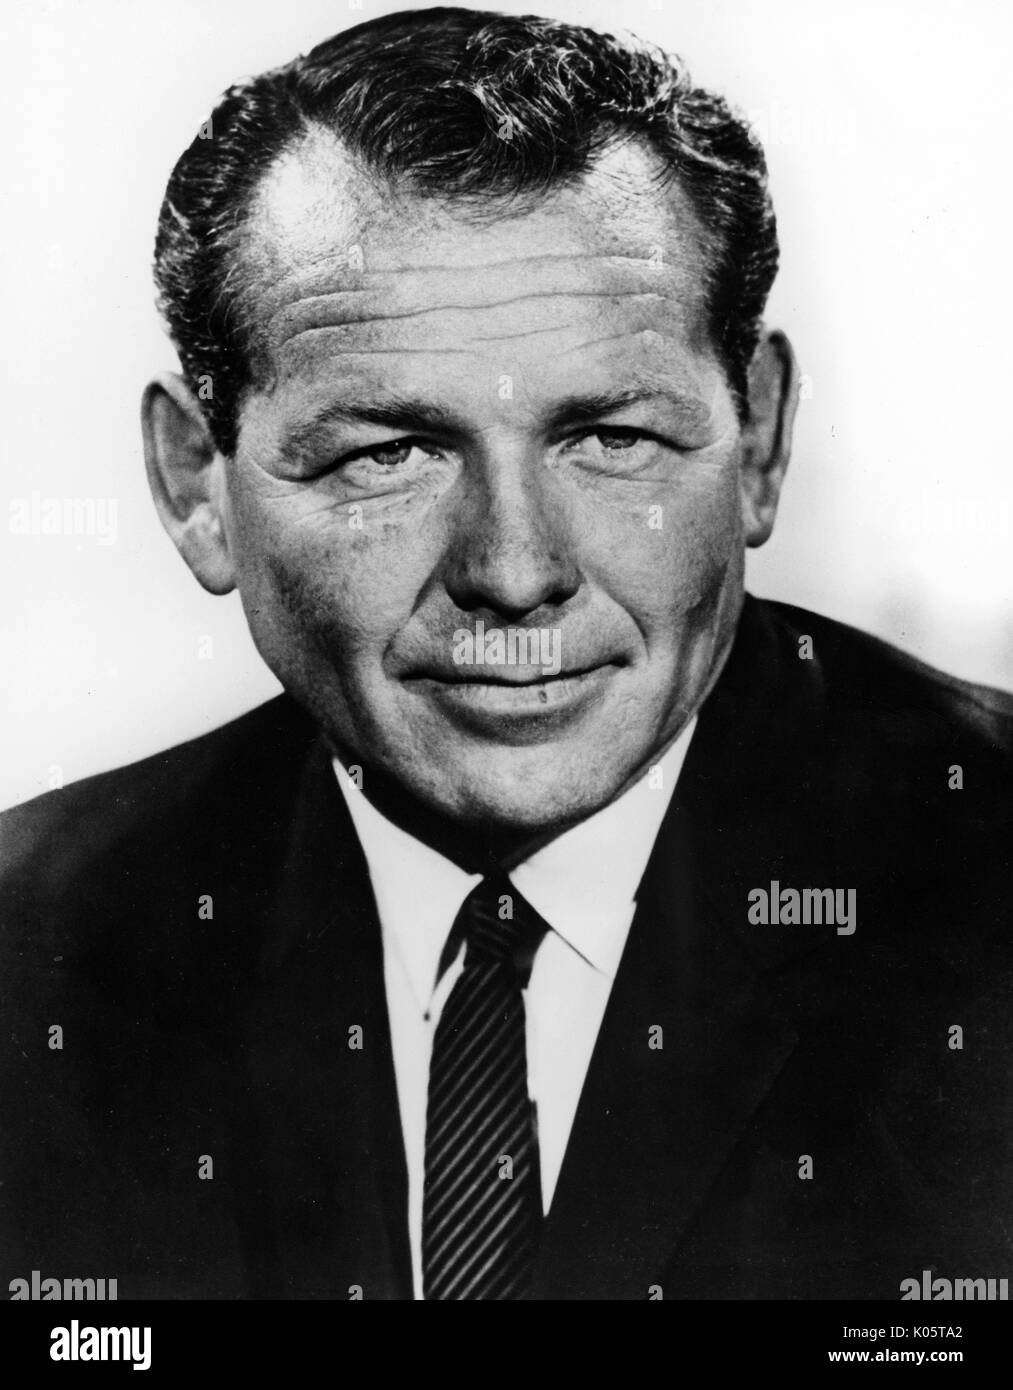 Half length portrait of Robert H Finch, who was United States Secretary of Health, Education, and Welfare, 1970. Stock Photo